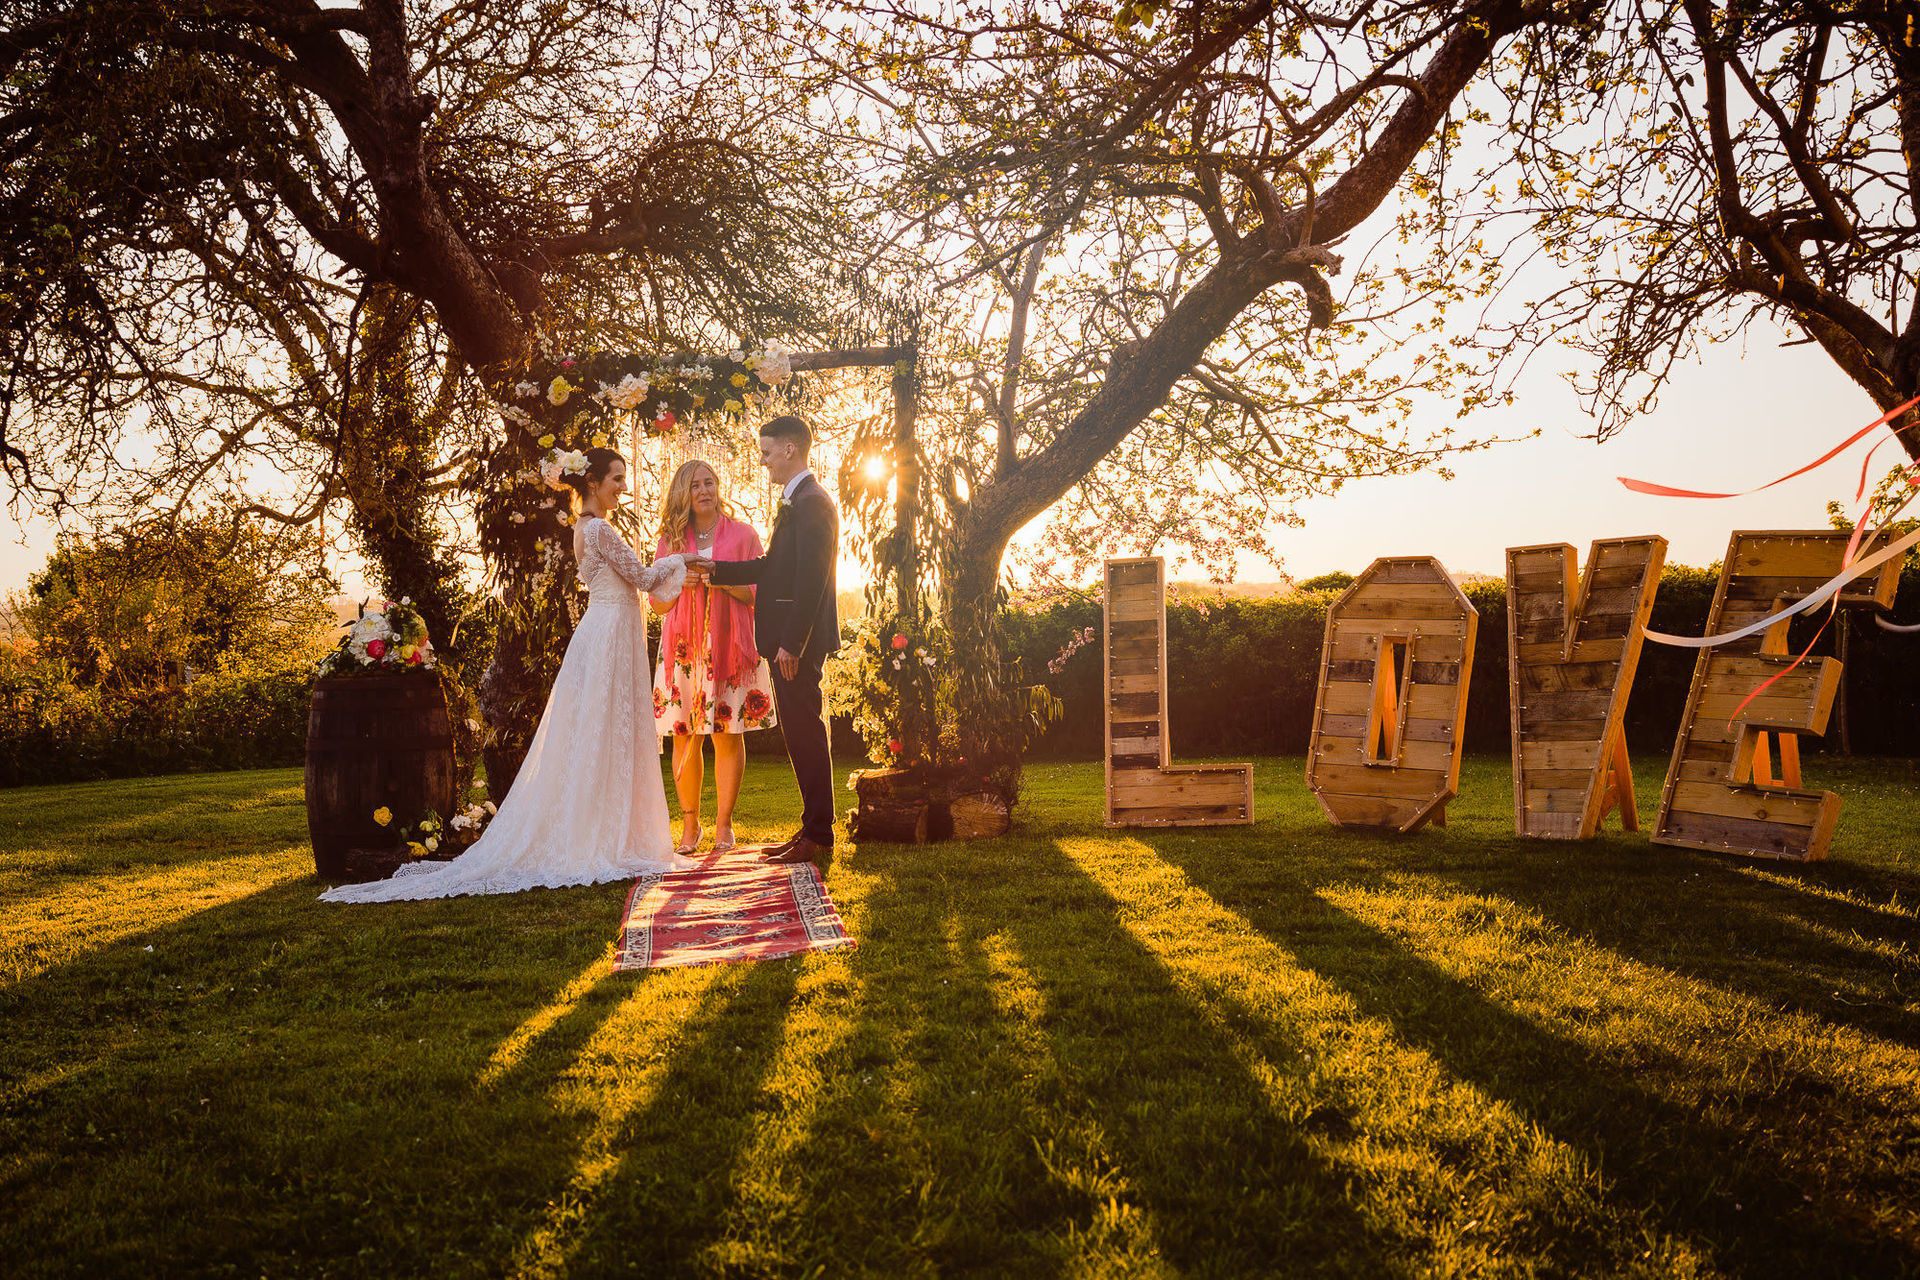 Colourful Outdoor Wedding at Dairyhouse Farm Somerset